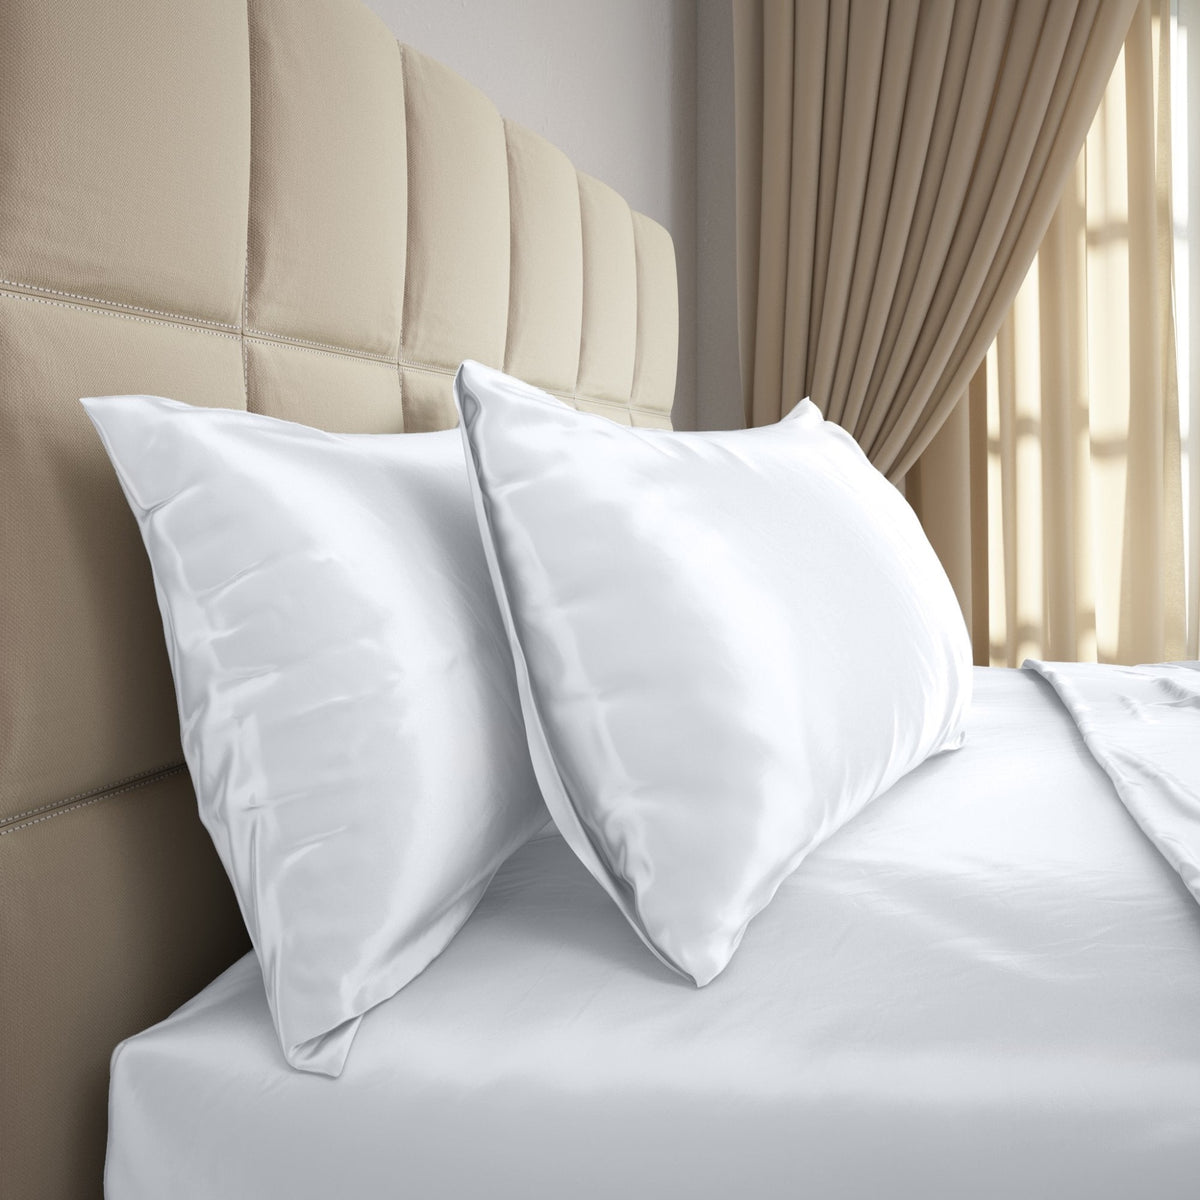 Sideview of Mulberry Park Silks Deluxe 19 Momme Pure Silk Pillowcase in White Color